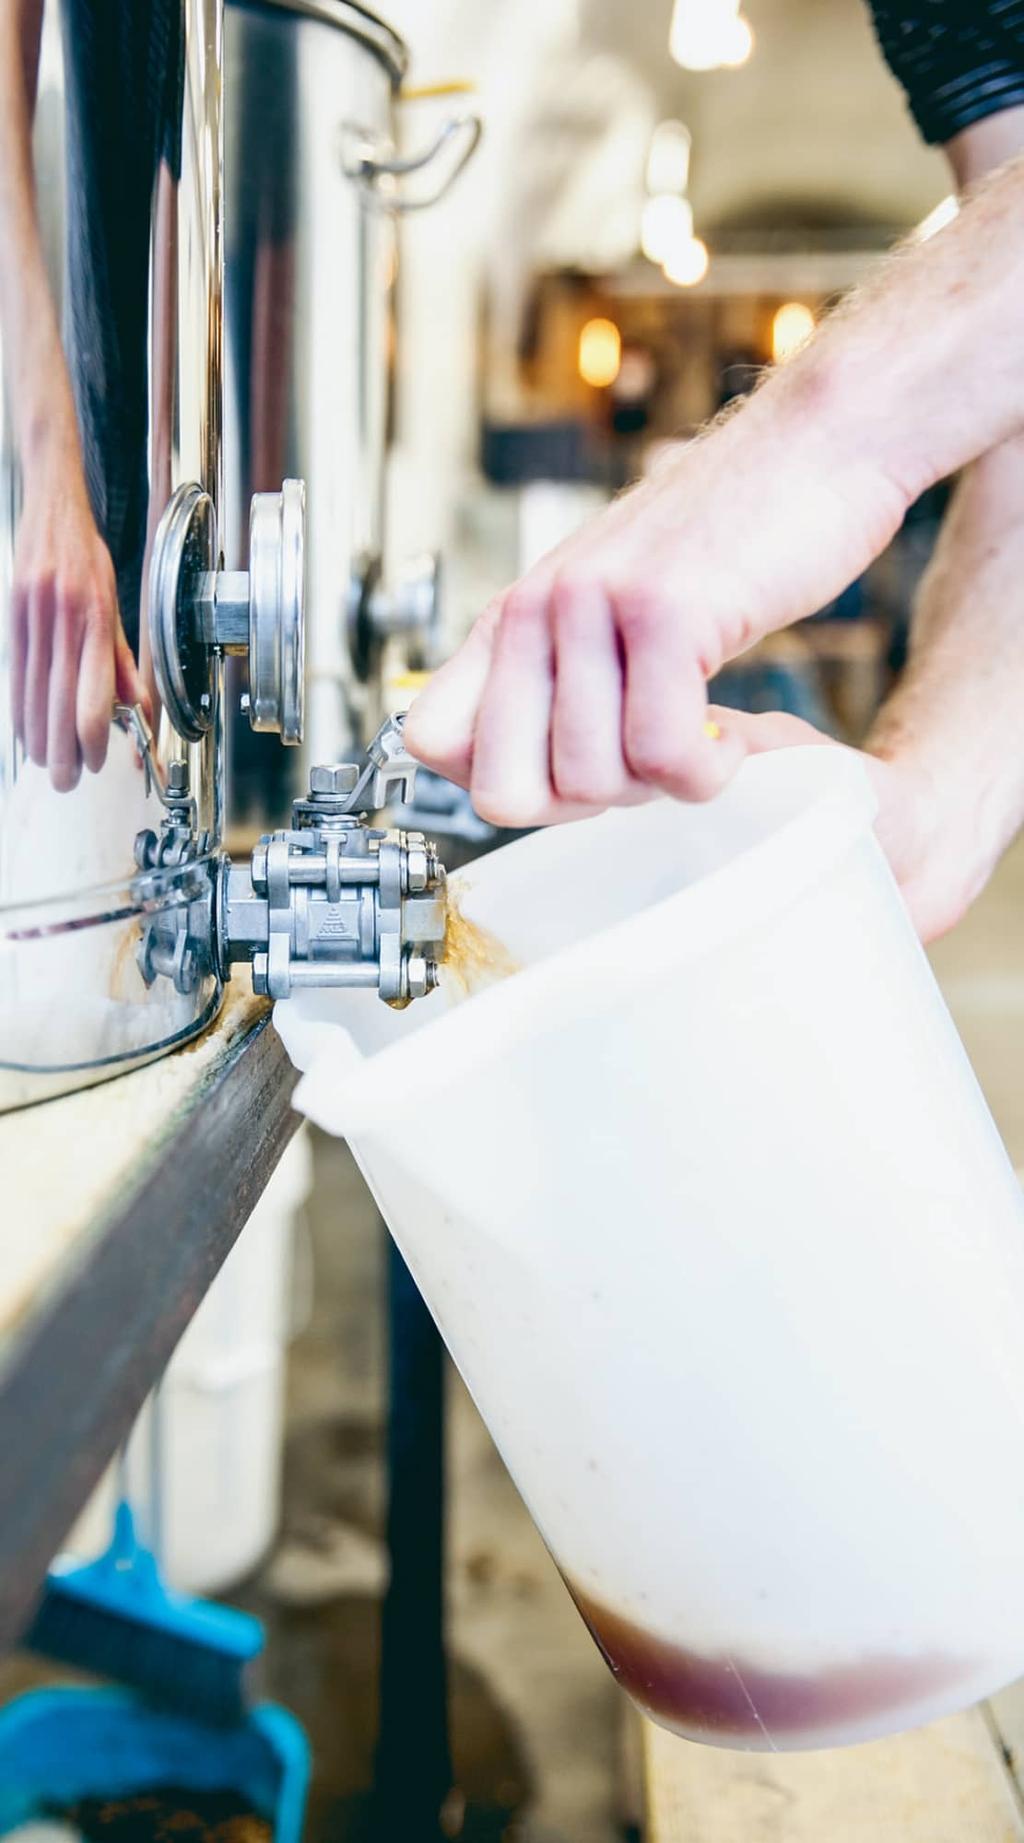 brewing uses a soluble powder or syrupy substance in the mashing stage. This can lead to decent beer, and many homebrew journeys begin this way.